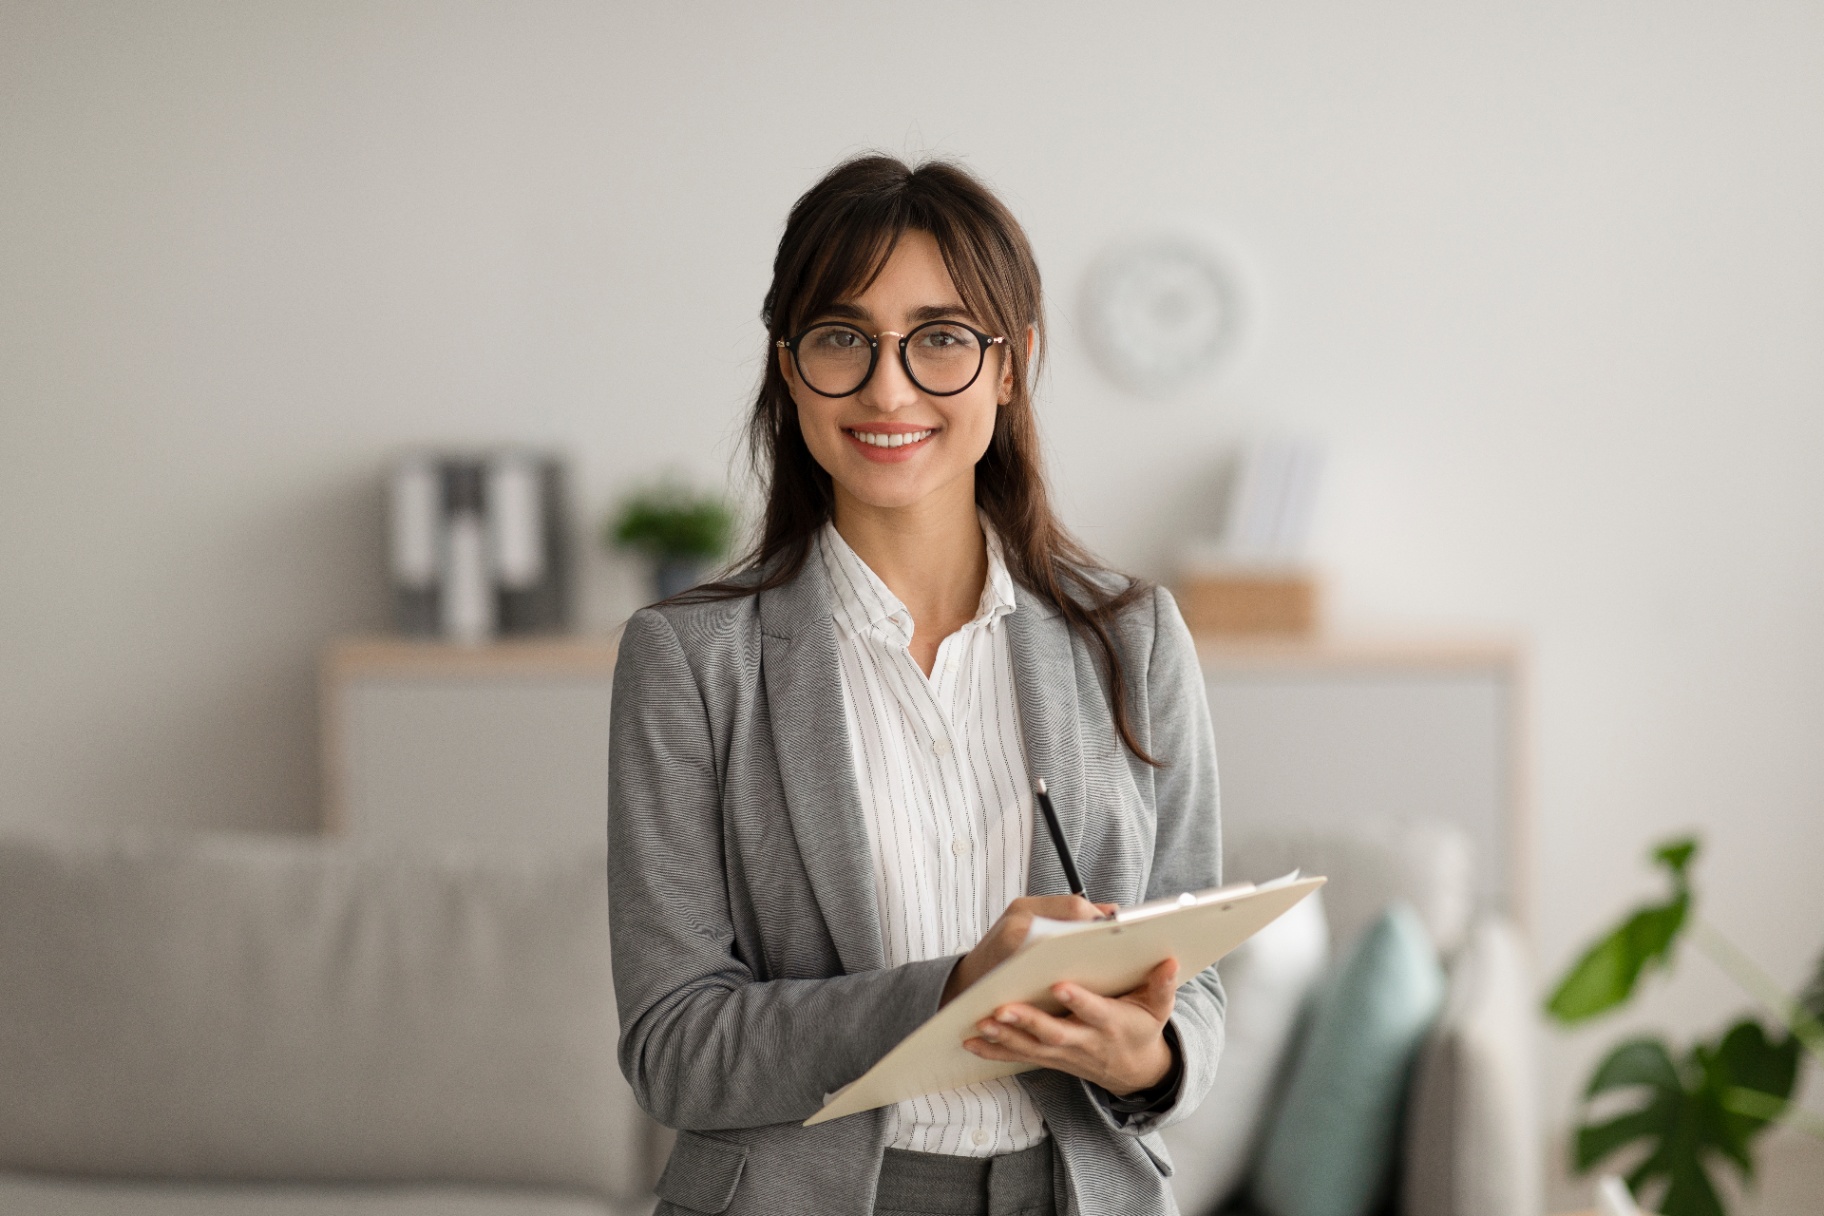 A woman smiles while holding a clipbaord. This could represent the support a therapist in Delray Beach, FL can offer. Learn more about Palm Beach County, FL therpay and other serivces by searching for online therapy in Florida today.